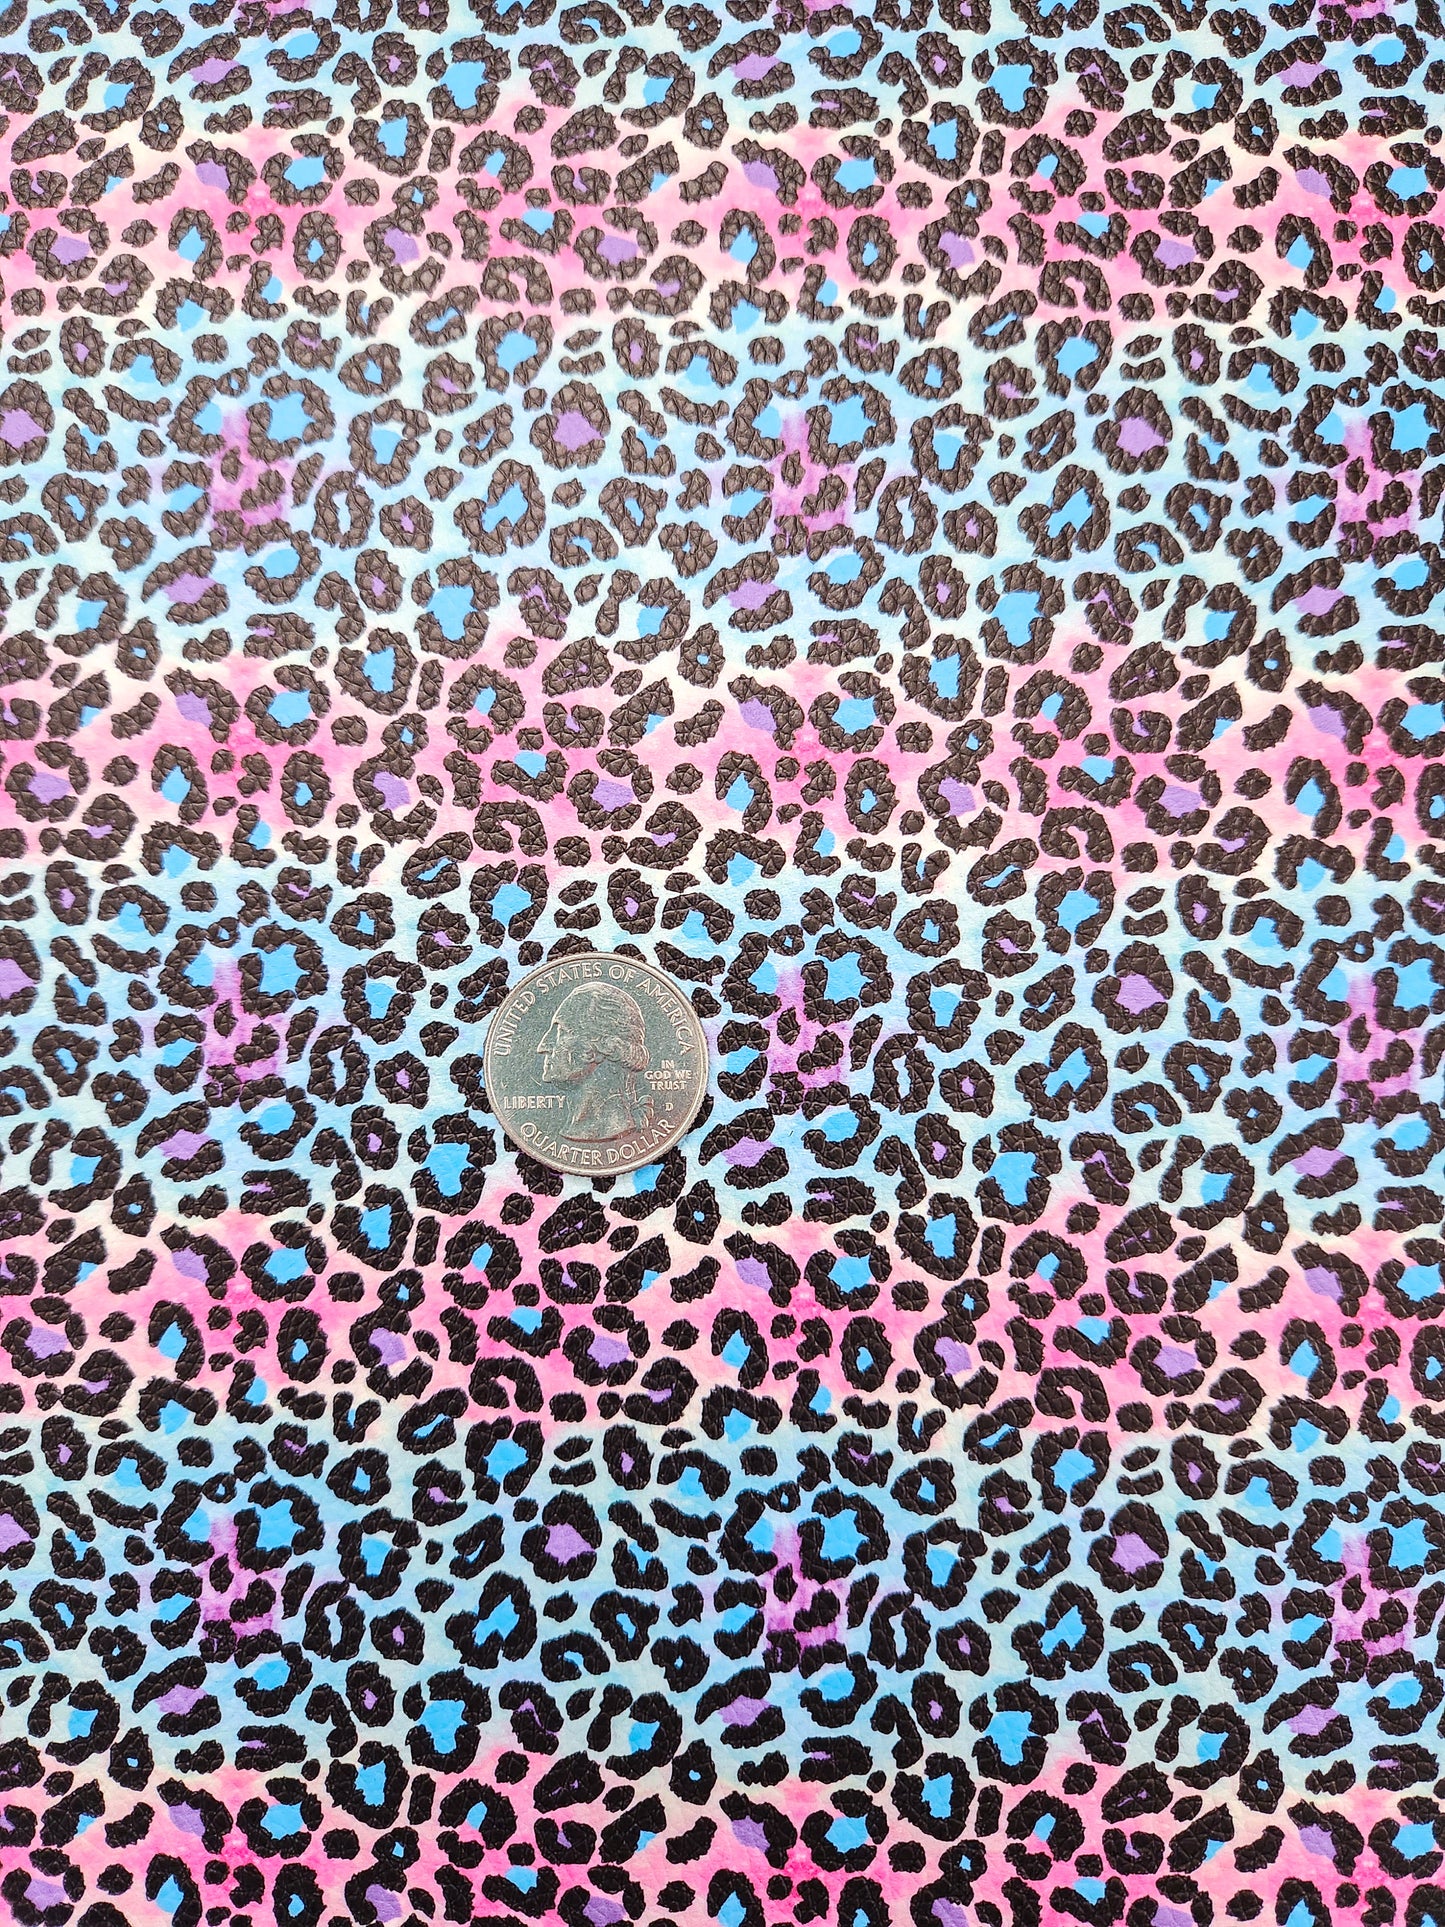 Cool Colorful Leopard Print 9x12 faux leather sheet